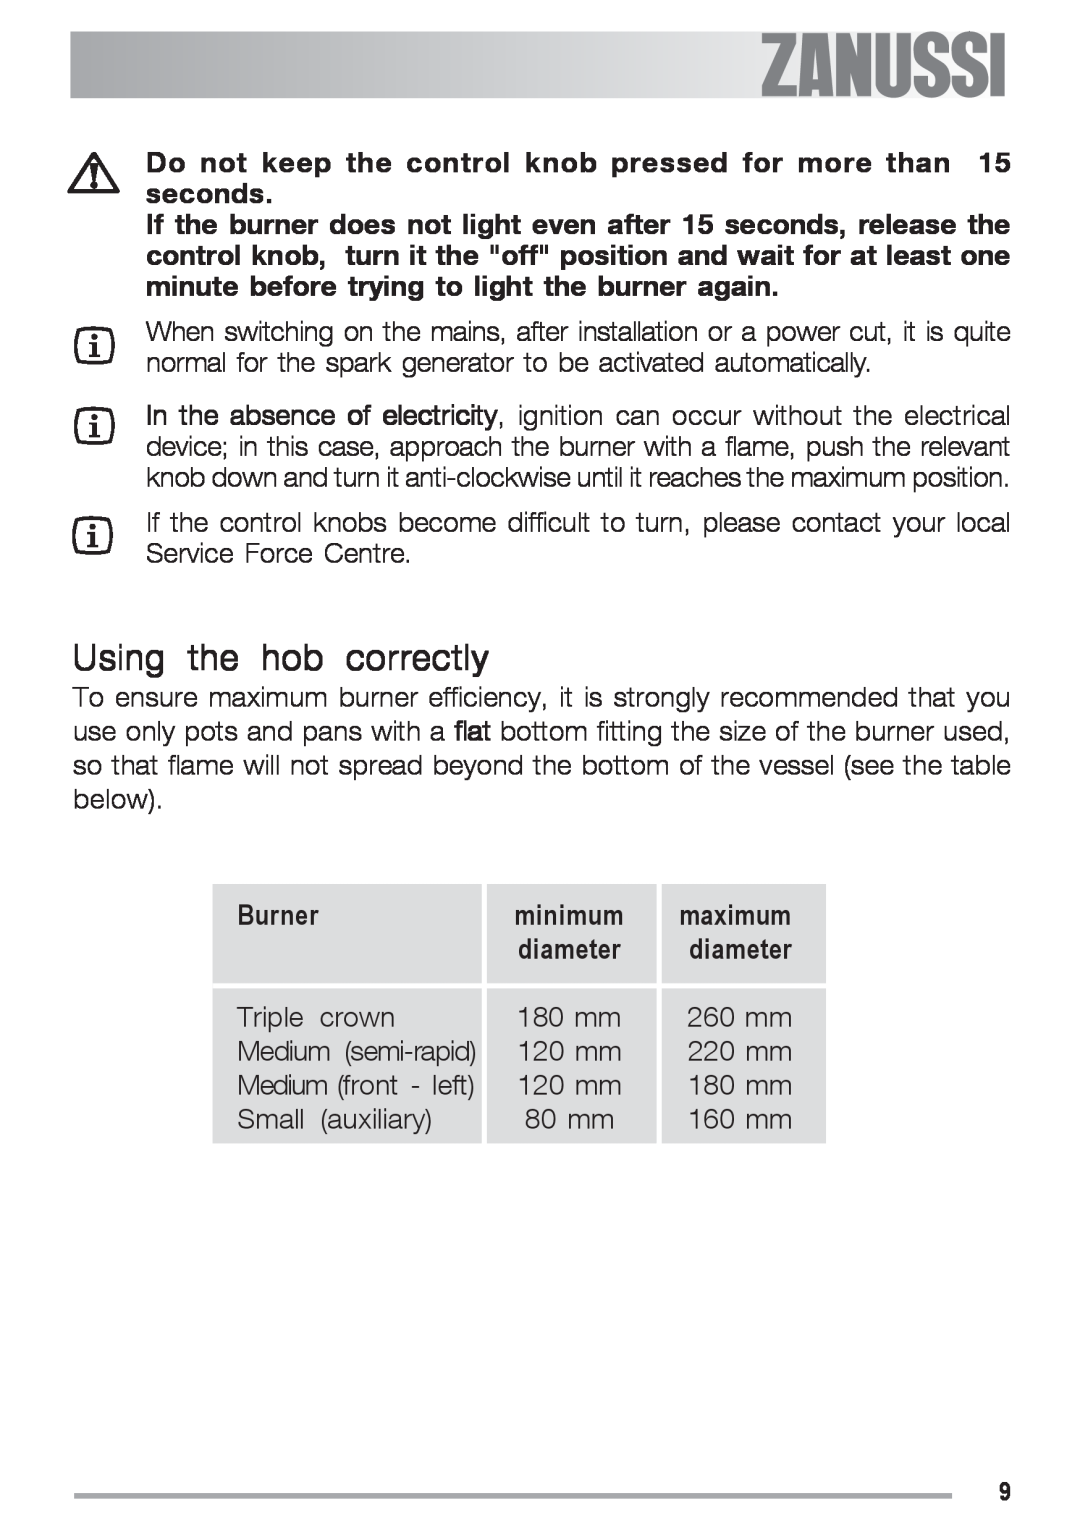 Zanussi ZGS 682 ICT manual Using the hob correctly, Do not keep the control knob pressed for more than 15 seconds, Burner 